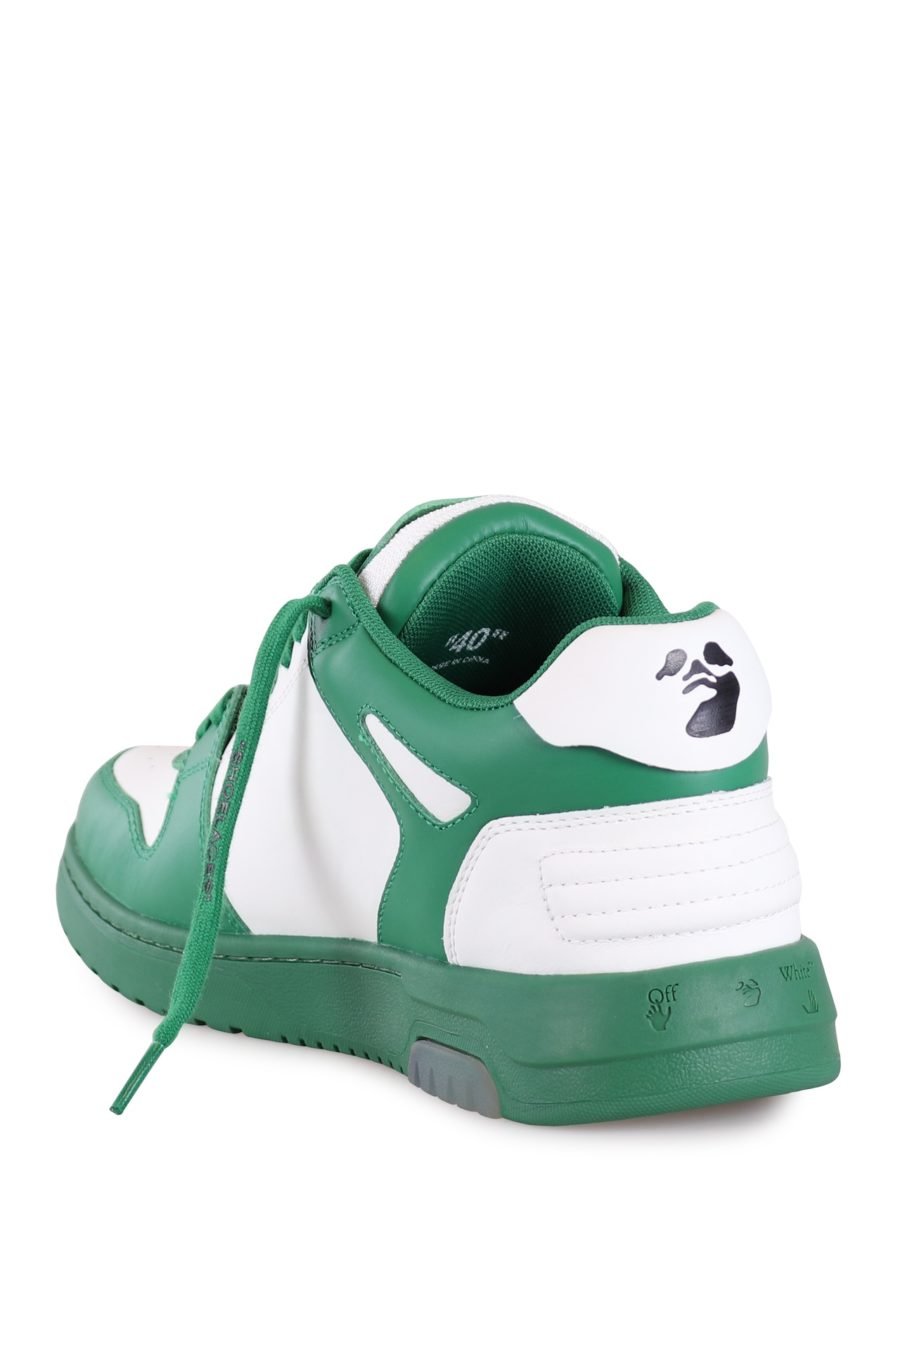 Zapatillas Off-White "out of office" blancos con verde - 52f918d62d3bf5ad7e6bf8d3038705fc3b29c49f